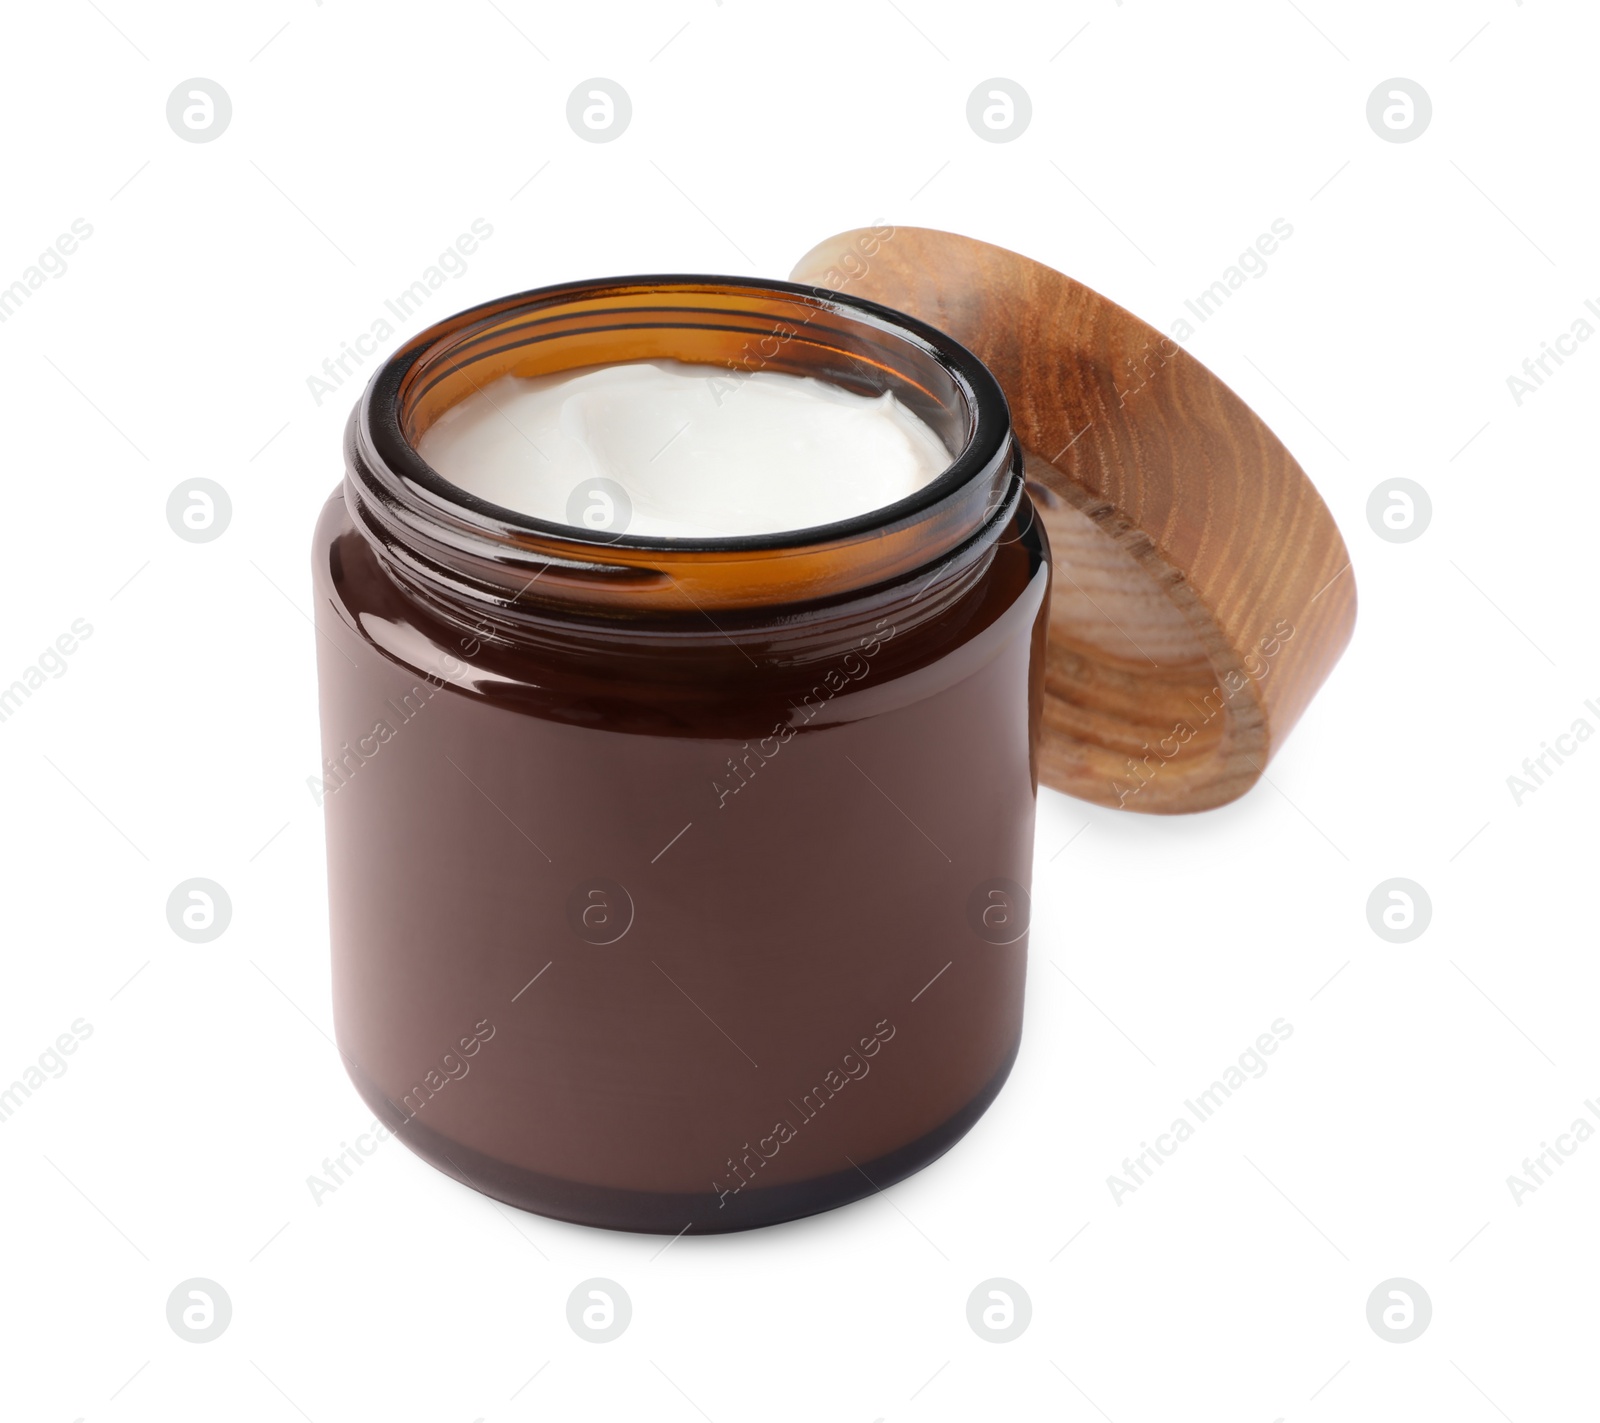 Photo of Jar of face cream isolated on white